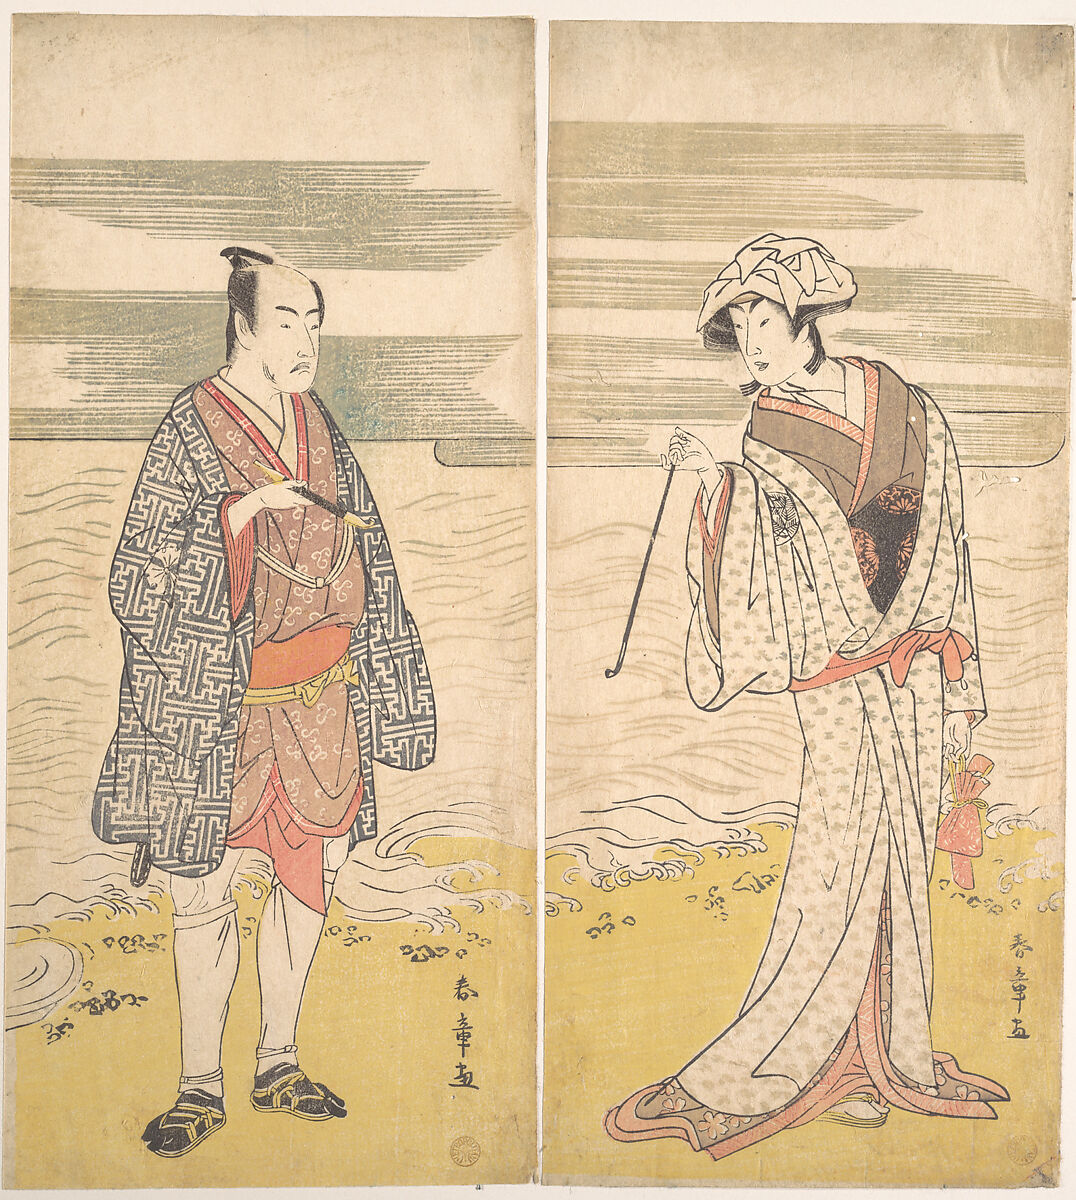 The Fourth Matsumoto Koshiro as a Man Dressed in a Short Kimono, Katsukawa Shunjō (Japanese, died 1787), Diptych of woodblock prints; ink and color on paper, Japan 